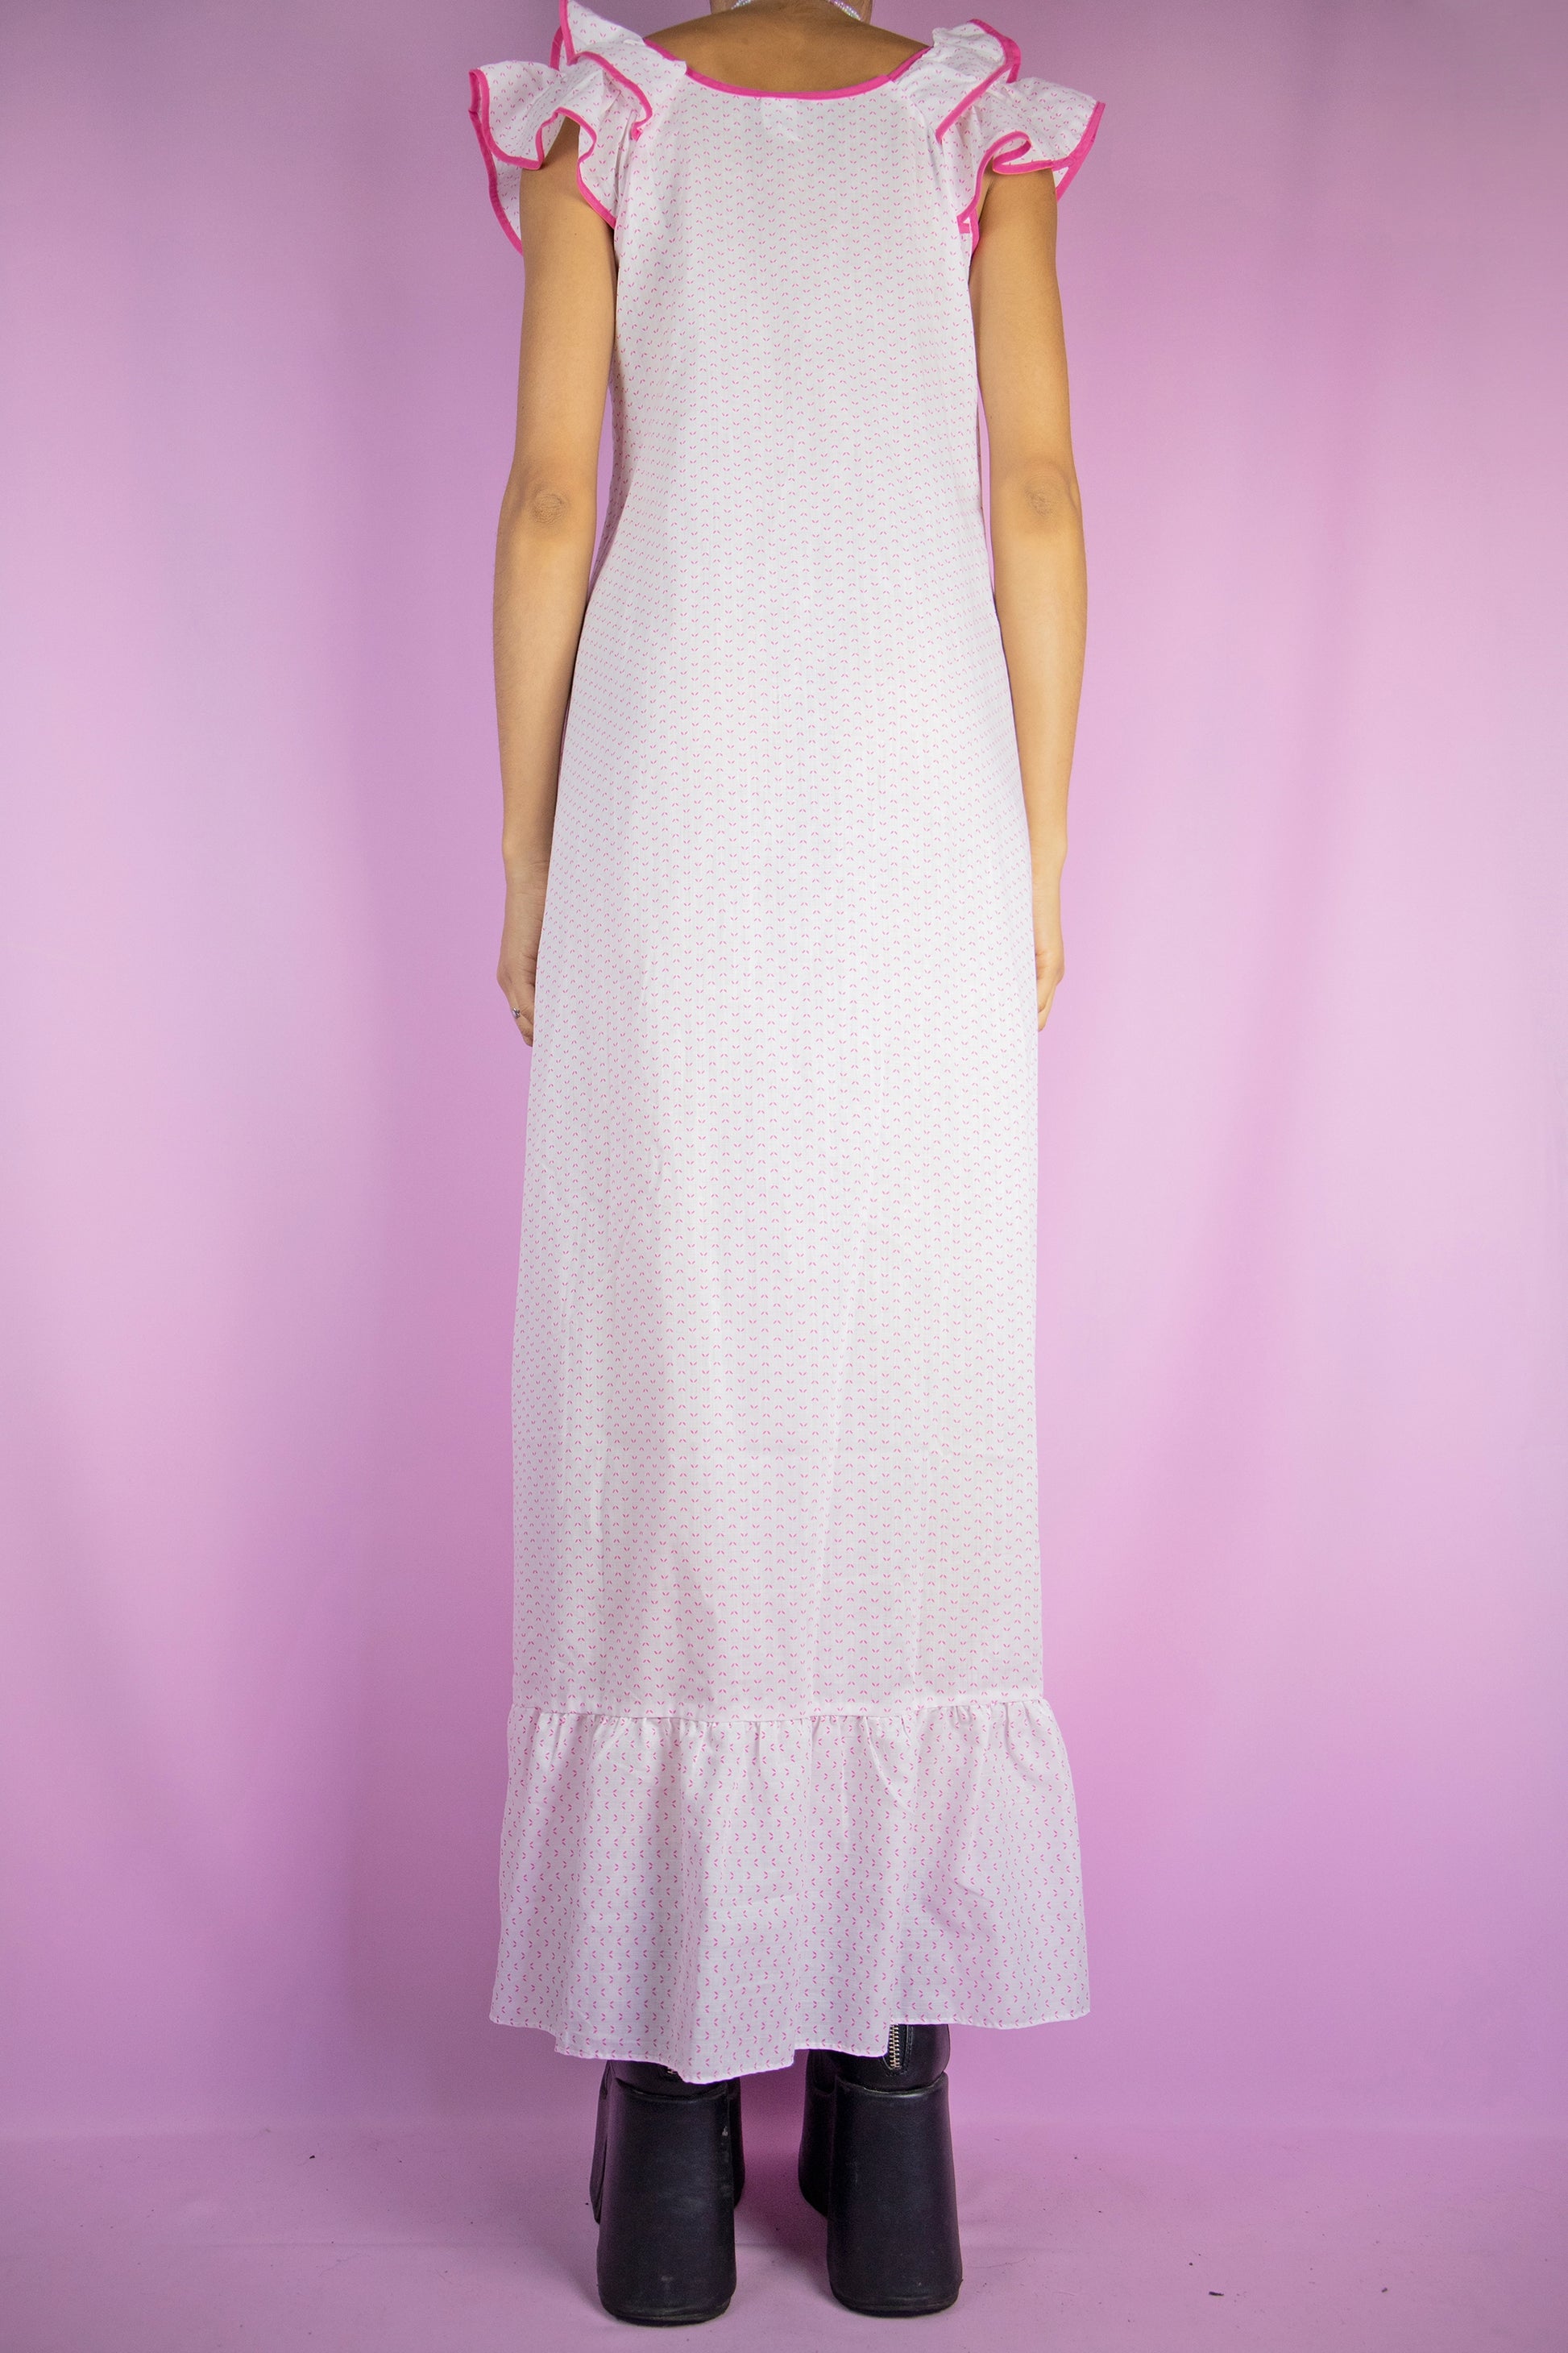 The Vintage 80s White Nightgown Midi Dress is a maxi dress lounge sleepwear with pink print and ruffles on the straps and hem.